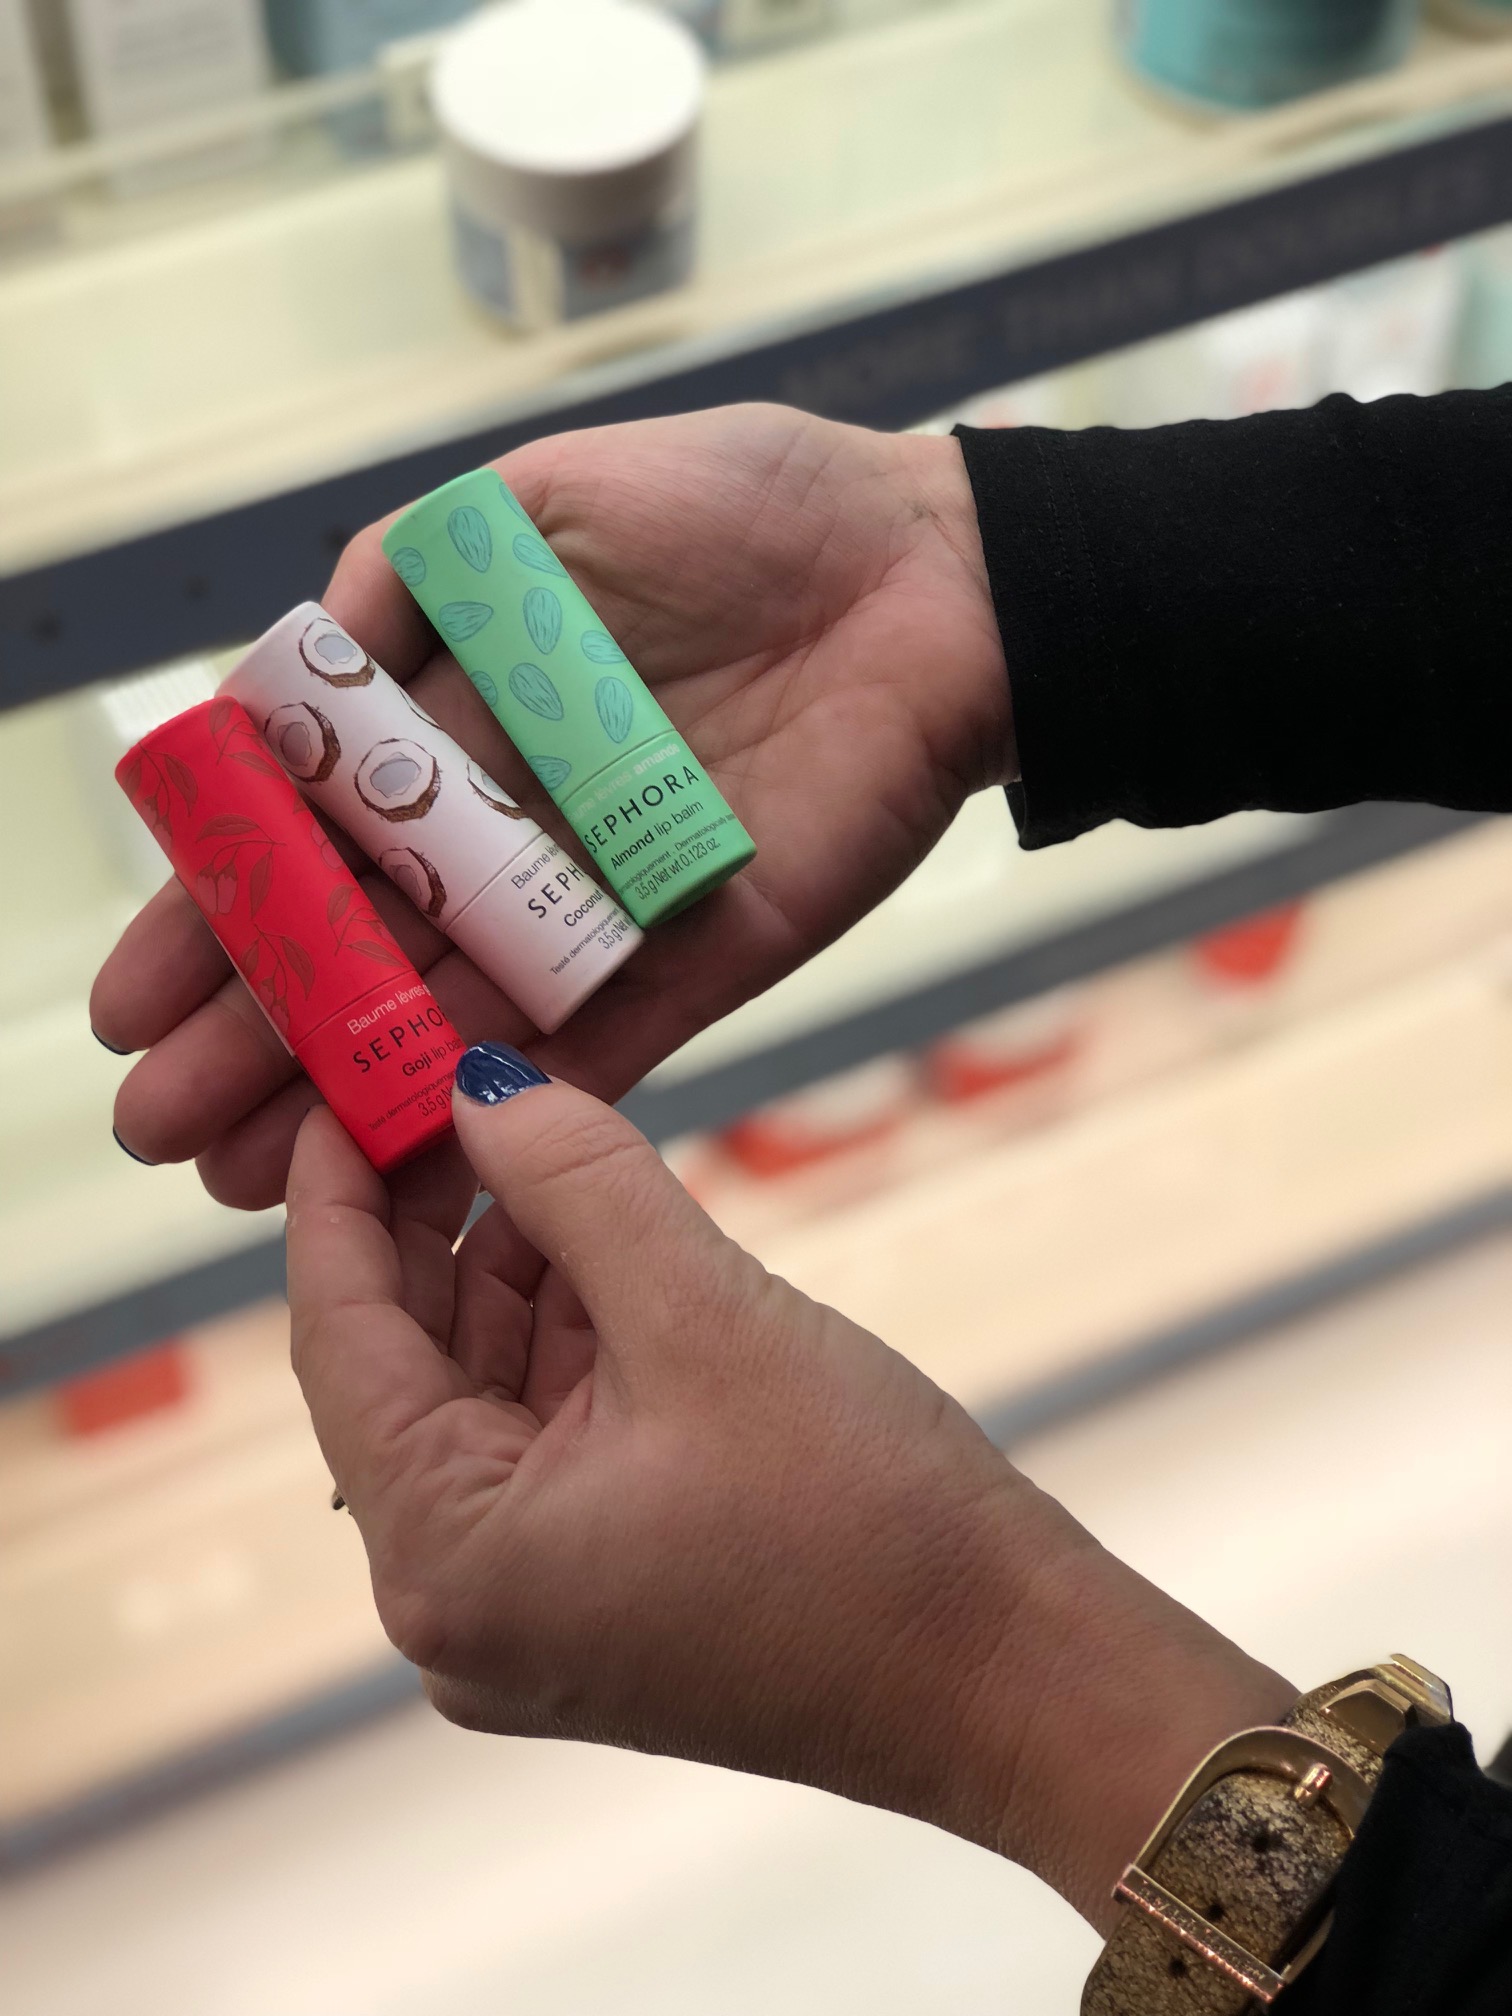 10 last-minute beauty gifts at Sephora in JCPenney: Sephora Collection lip balm